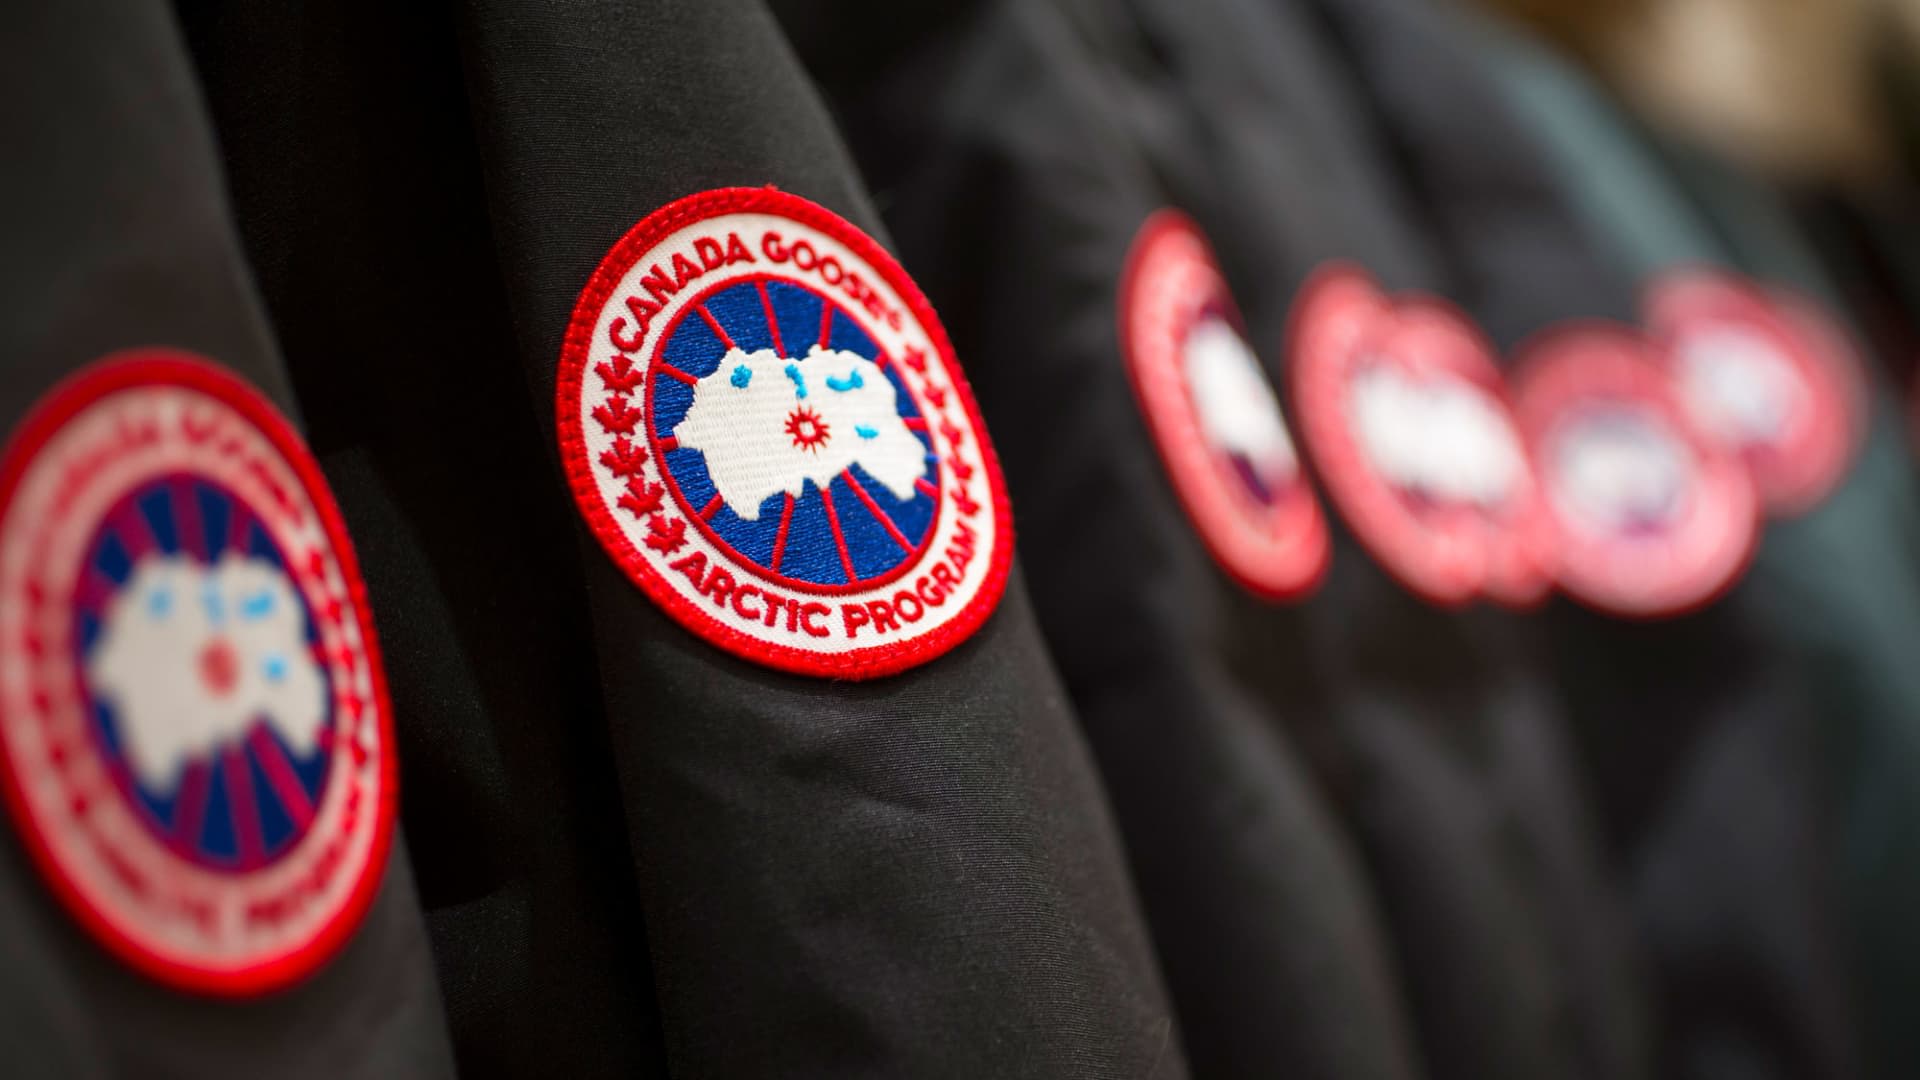 Canada Goose jumps 16% after the company reports growth surge in China